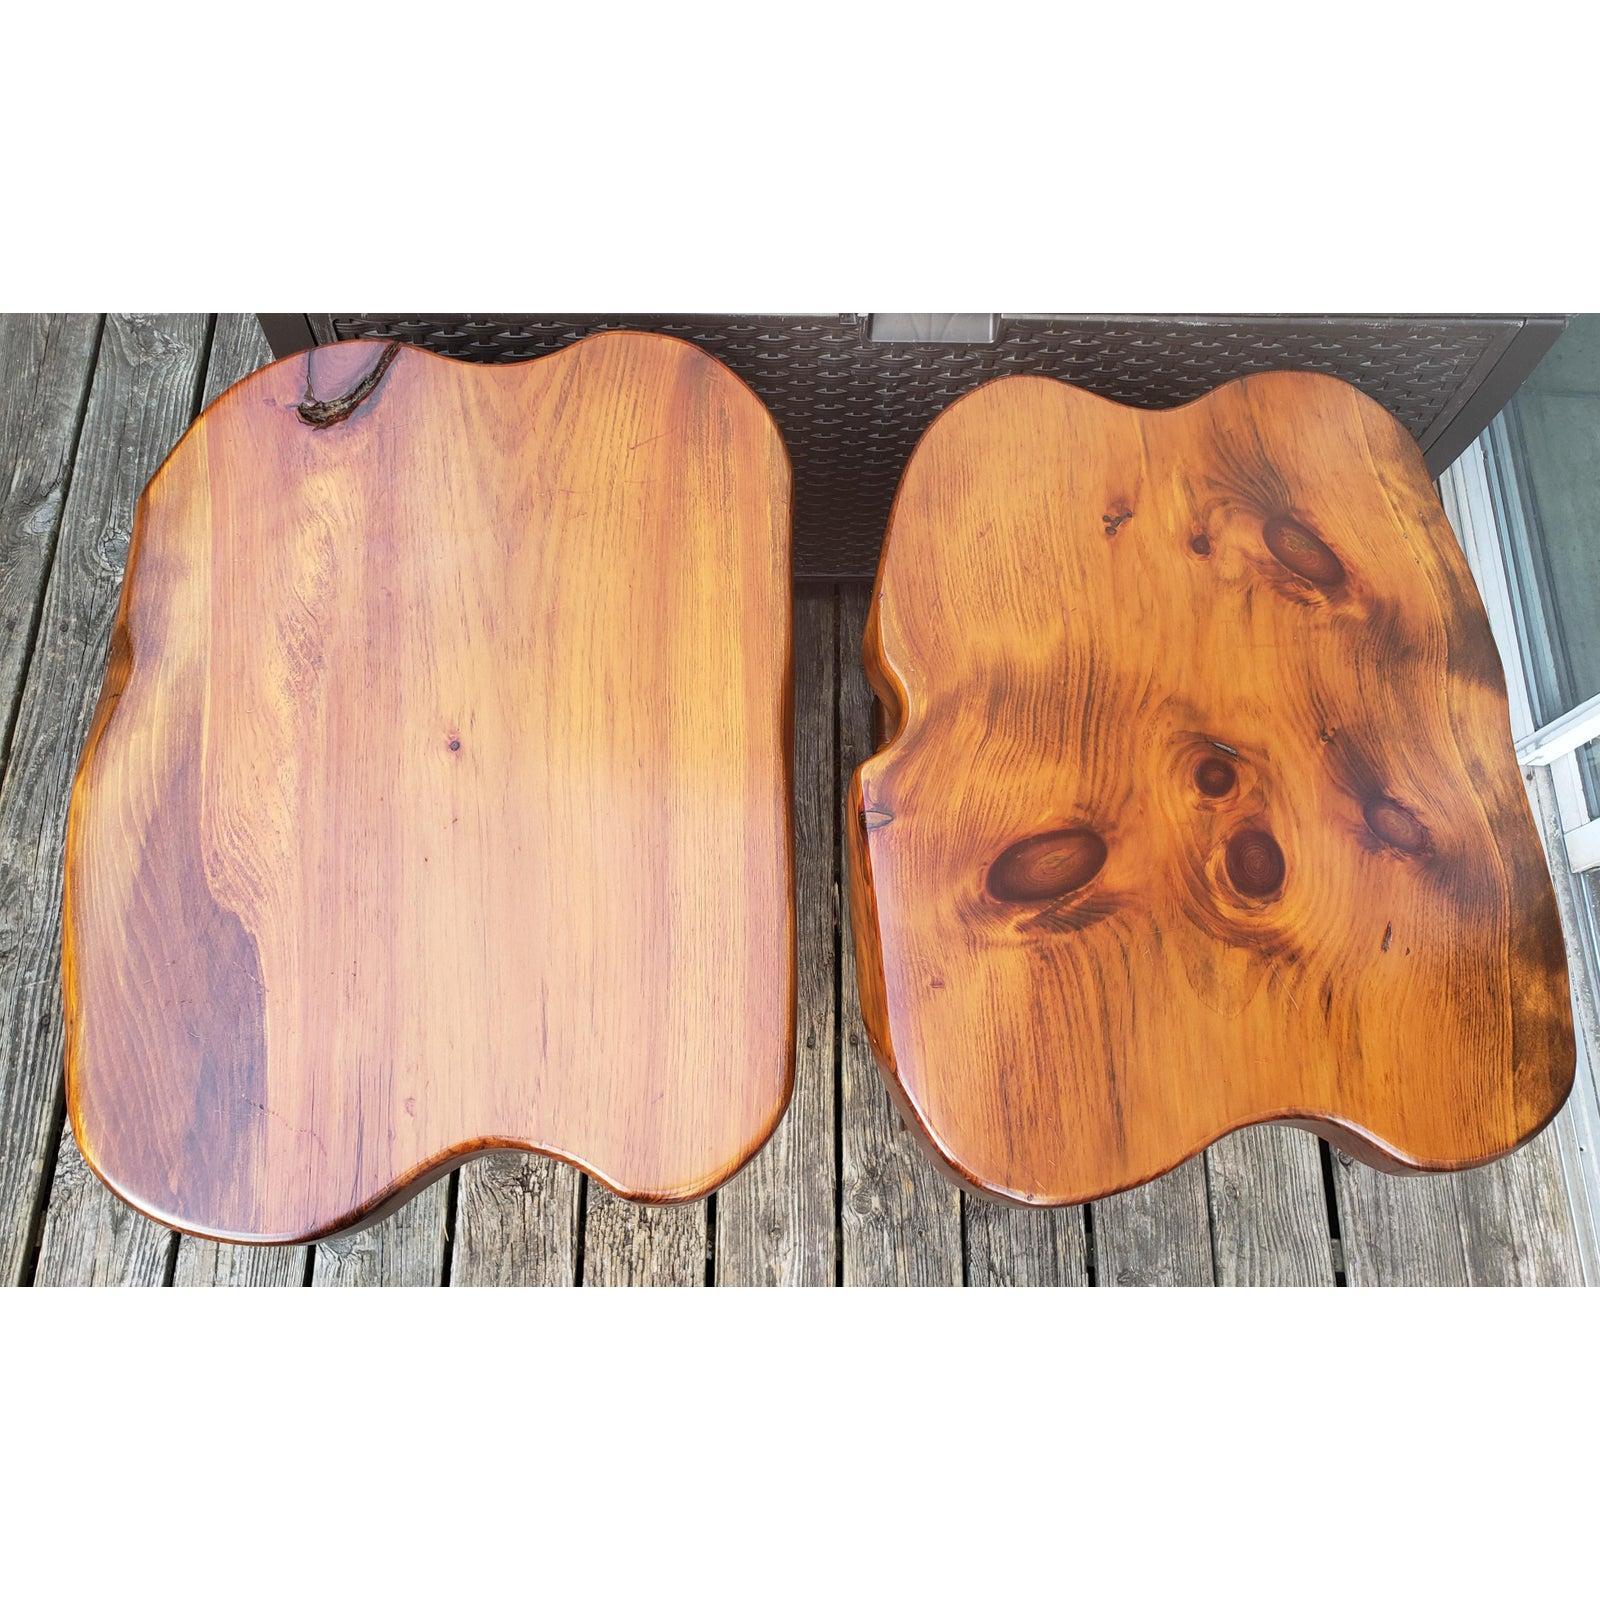 1980s Handcrafted Polished Walnut Pine Wood Slabs Trestle Side Tables, a Pair In Good Condition For Sale In Germantown, MD